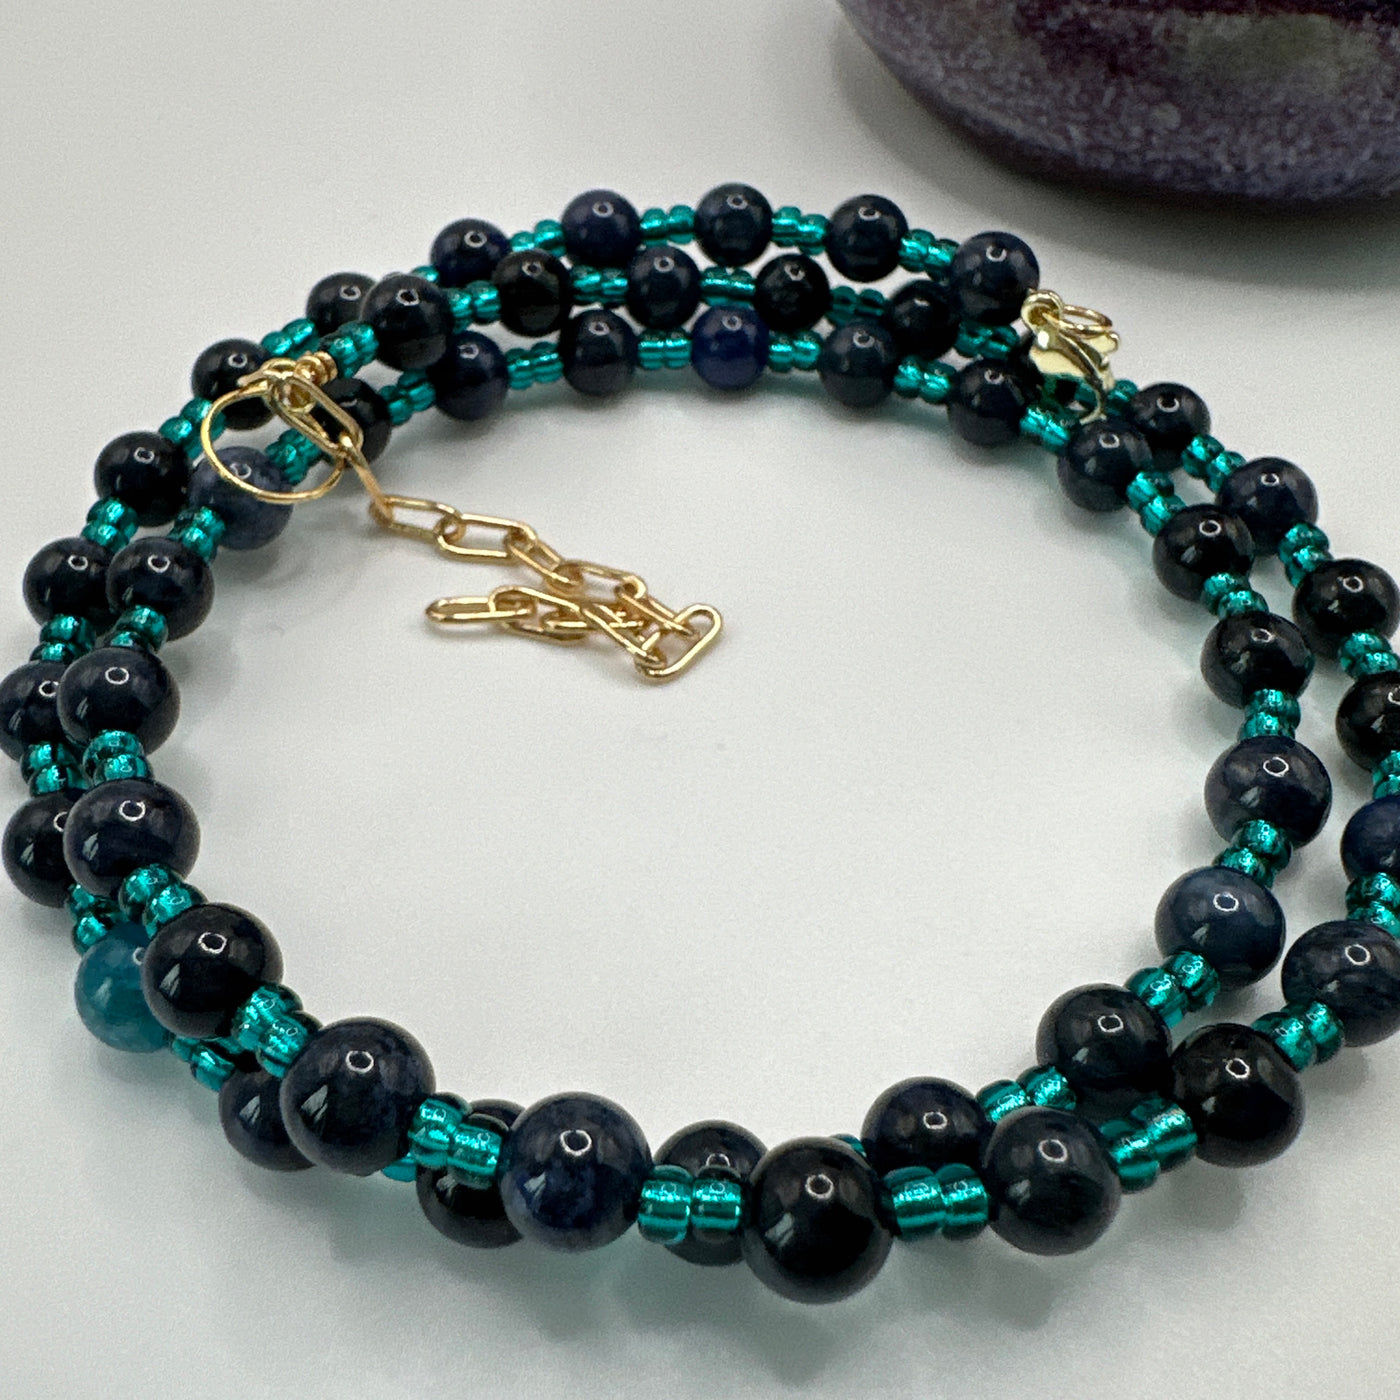 Rigid bracelet with duomertite and tyle blue pearls